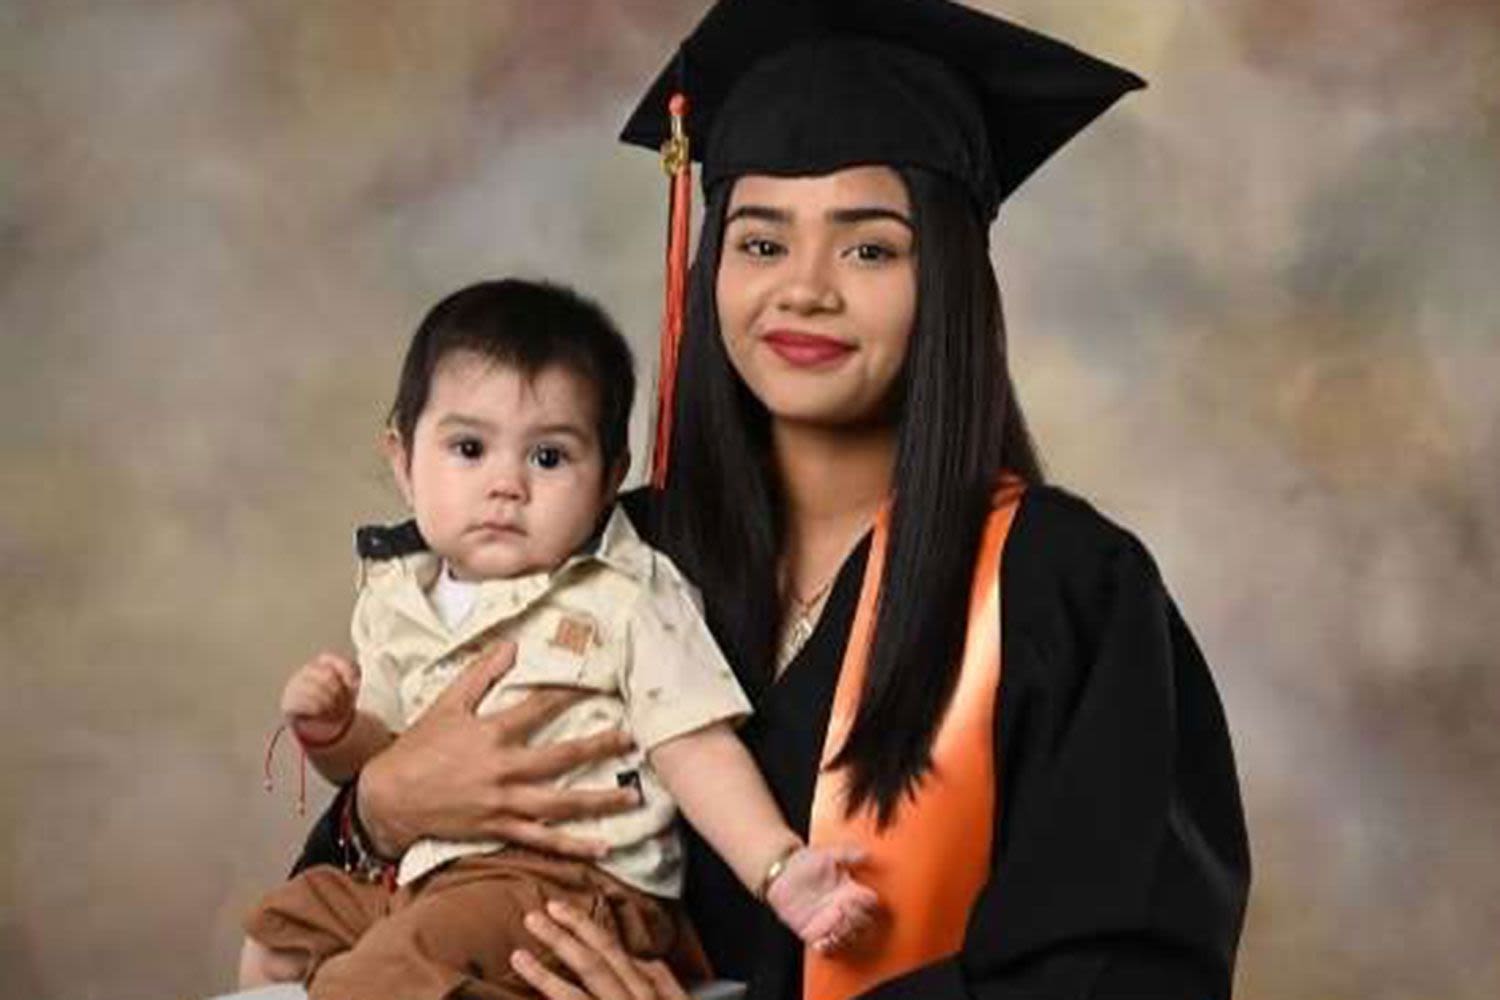 After Getting Pregnant, Teen Promised Parents She’d Keep Going to School. She Did – and Just Graduated